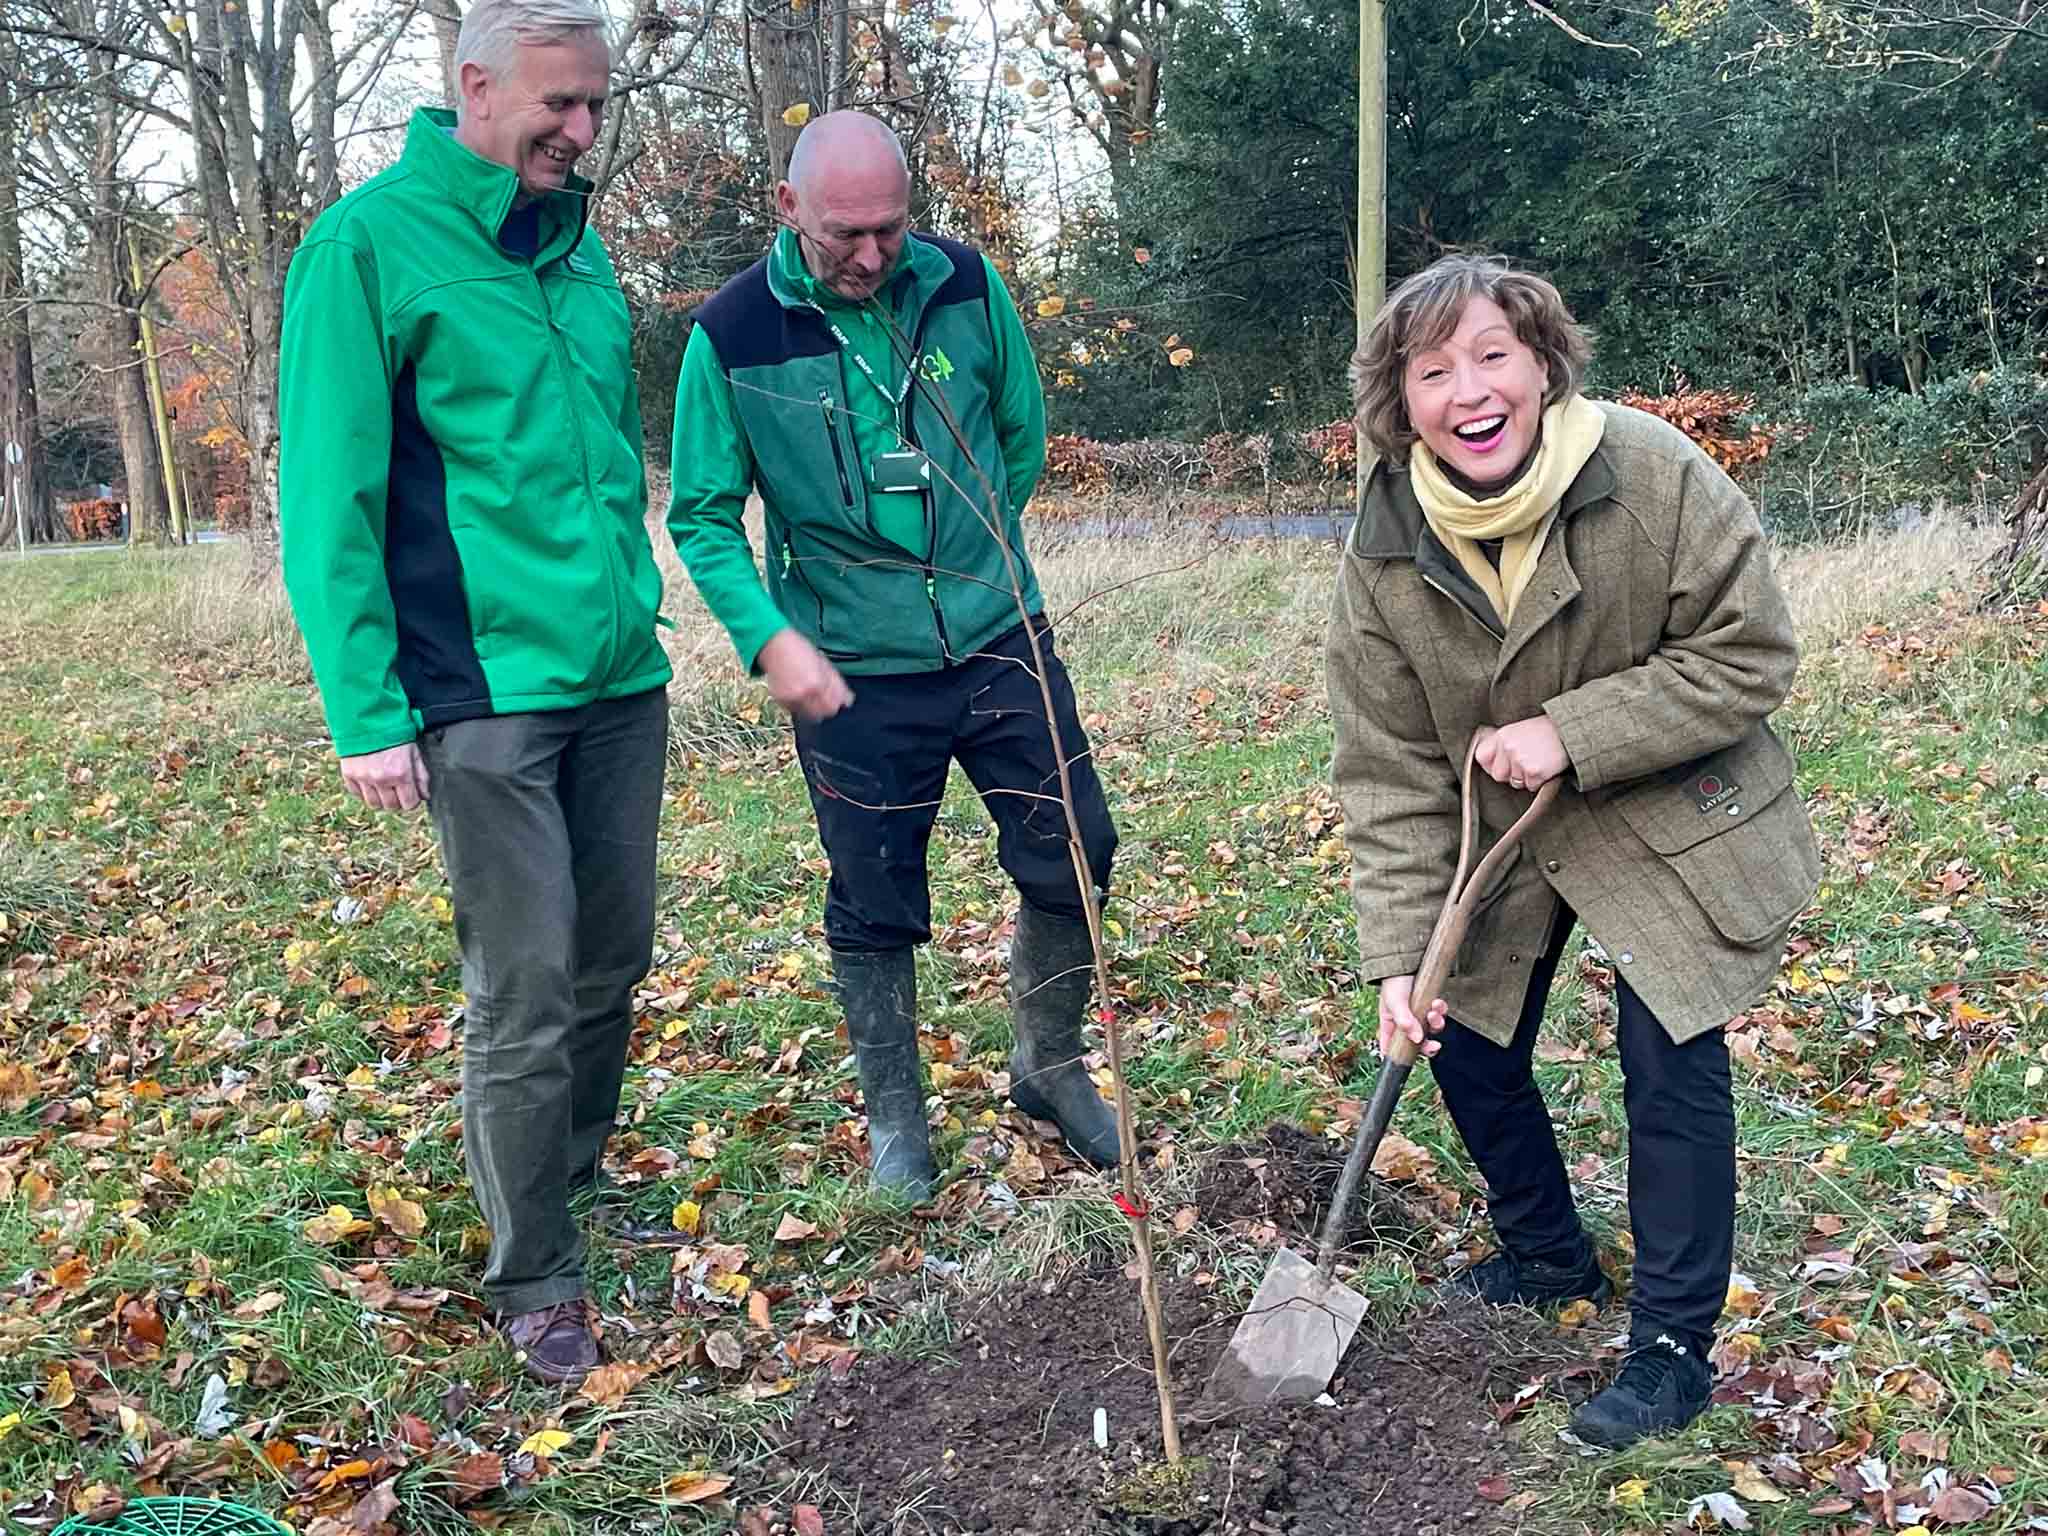 The minister digging with Forest Research staff